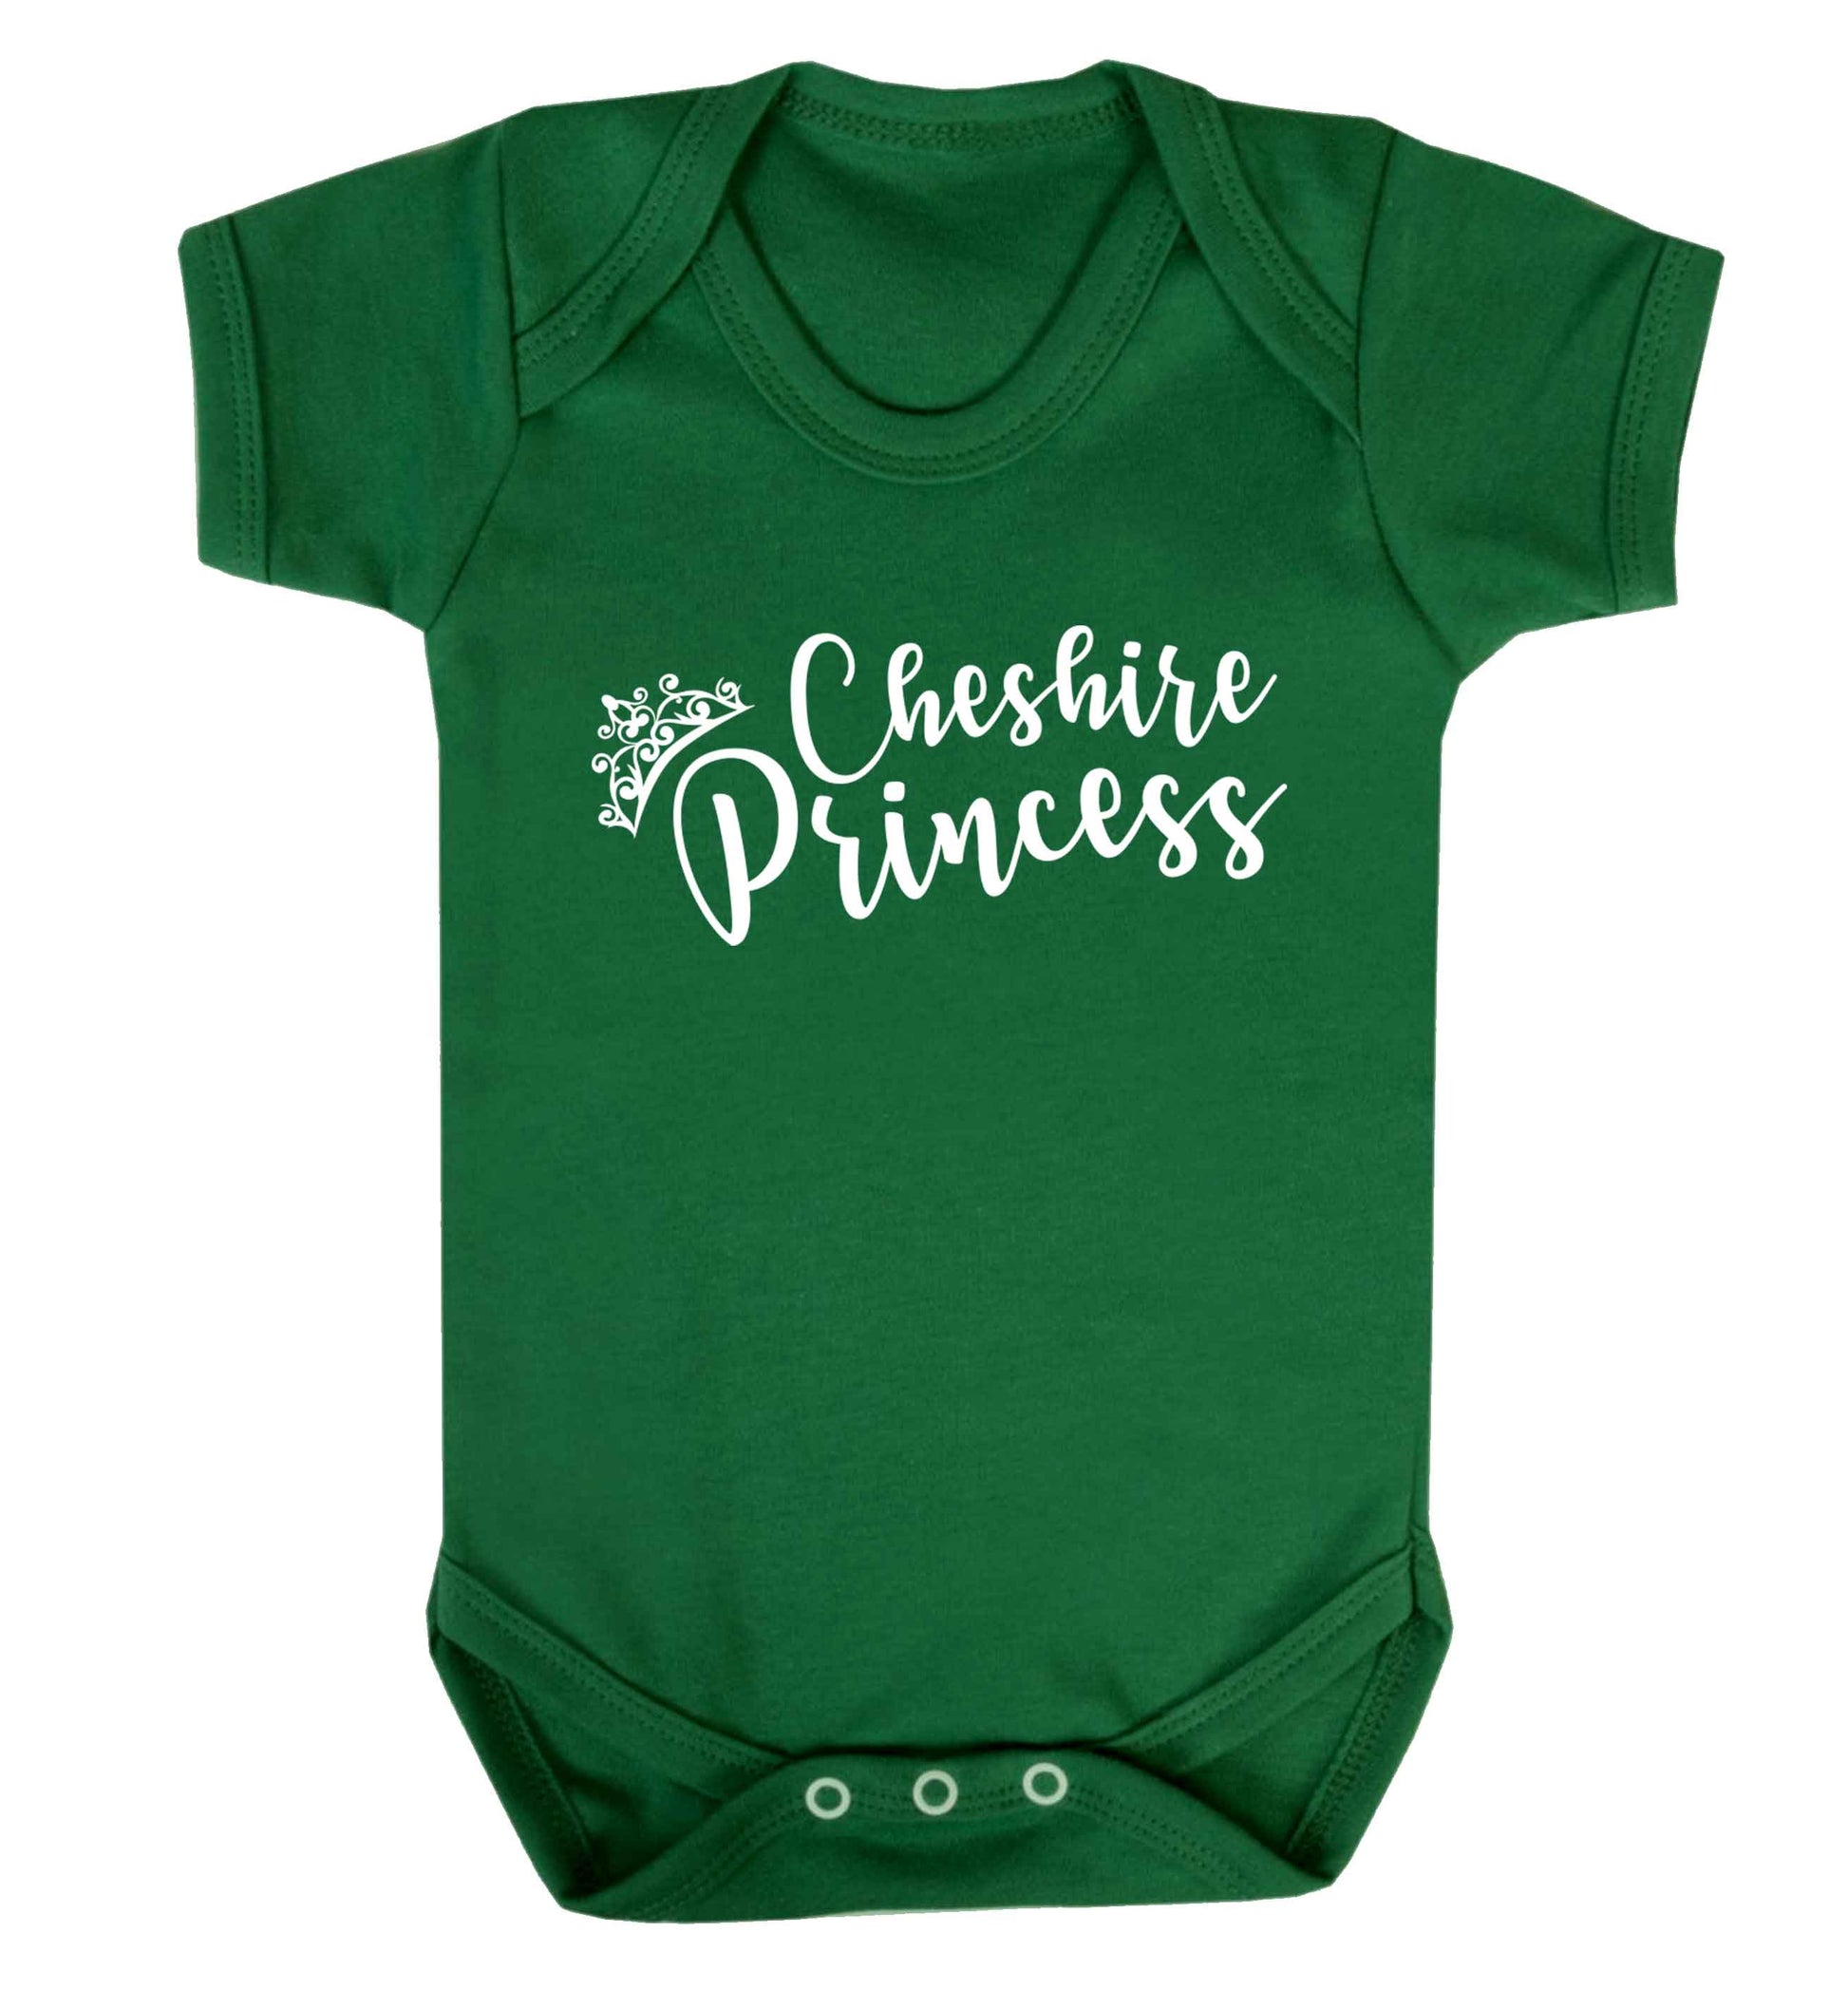 Cheshire princess Baby Vest green 18-24 months